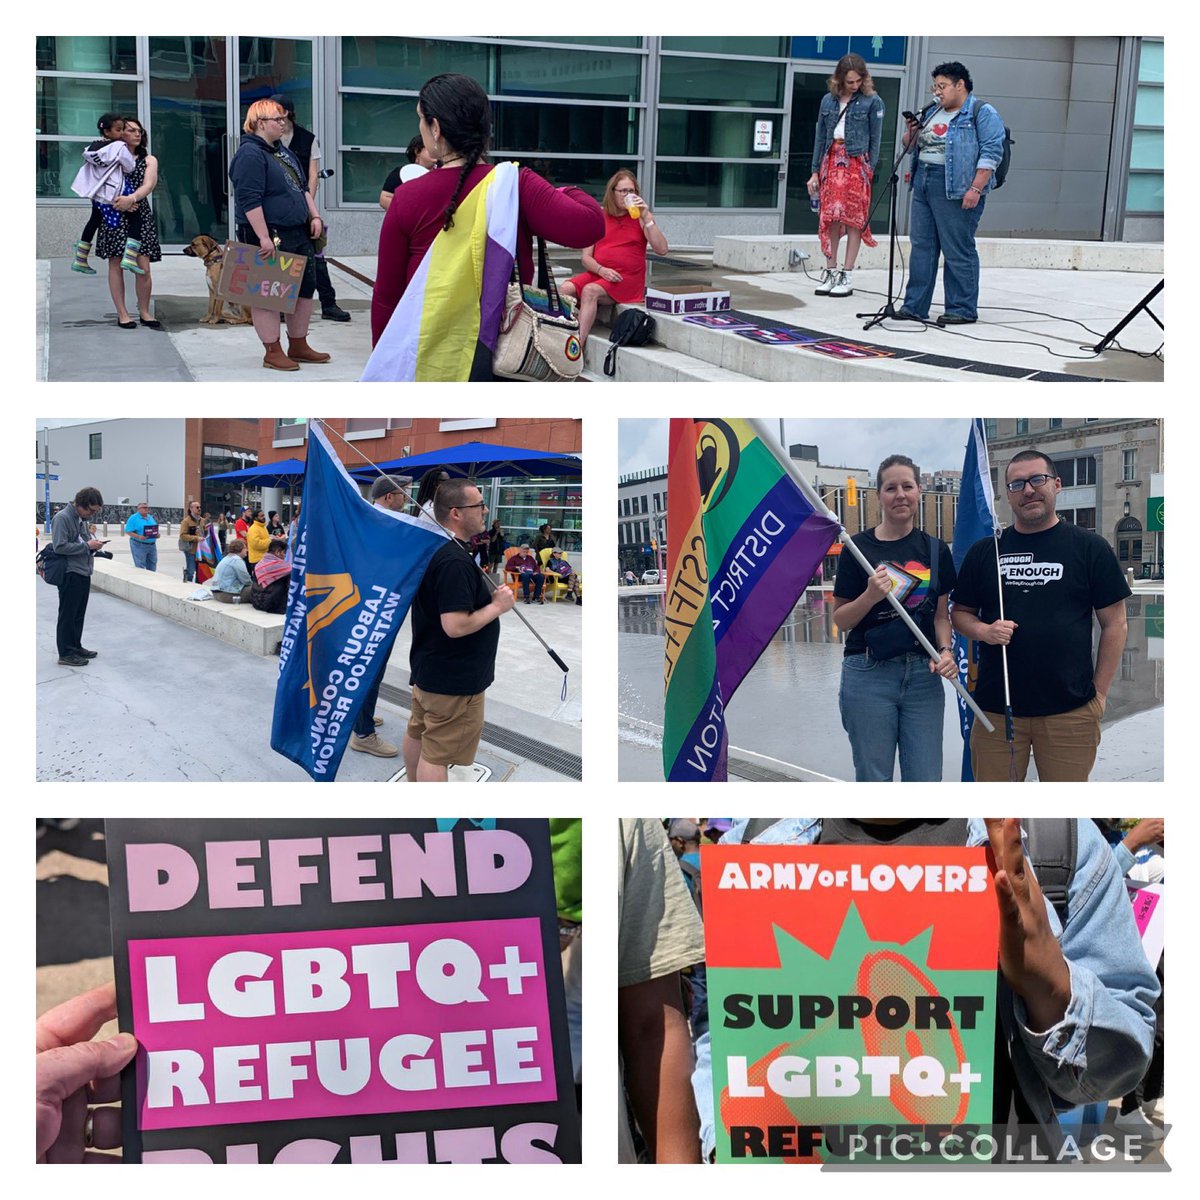 Happy to get out to a rally with @jjdonkersgoed to support the Rainbow Week of Action. #RainbowEquality matters everyday and we must continue the work to educate, support, and create safe spaces. #osstf #OntEd